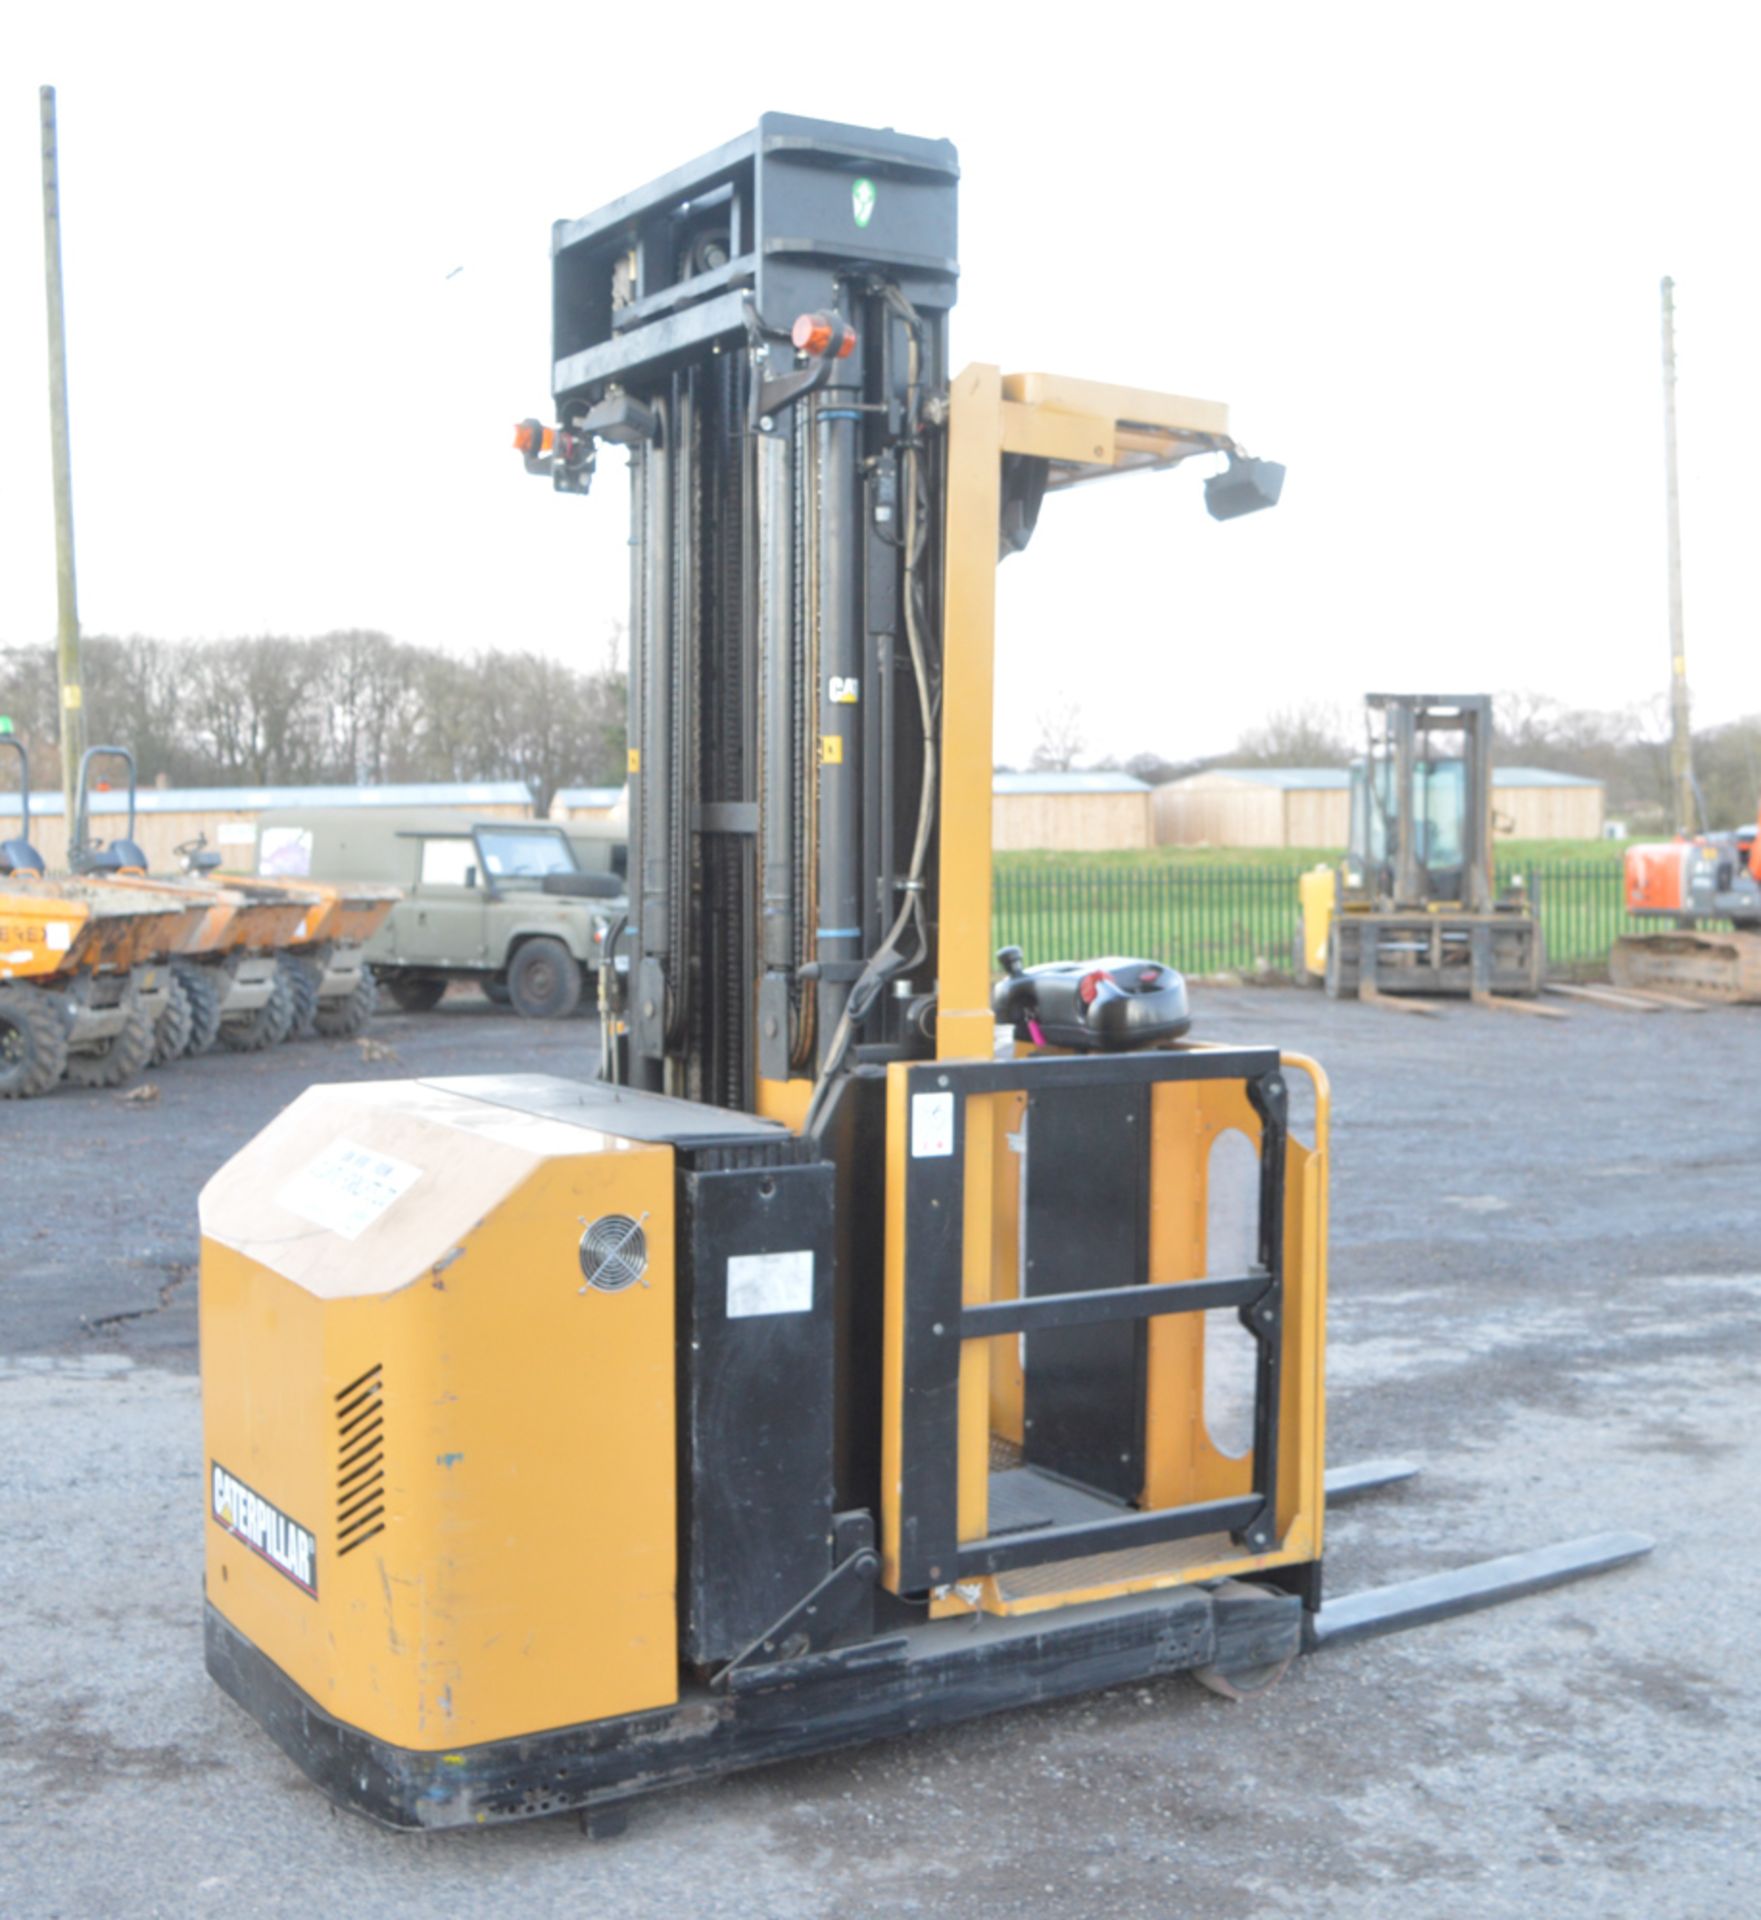 Caterpillar NOH08K battery electric high level order picker fork lift truck S/N: 1000346 Recorded - Image 2 of 6